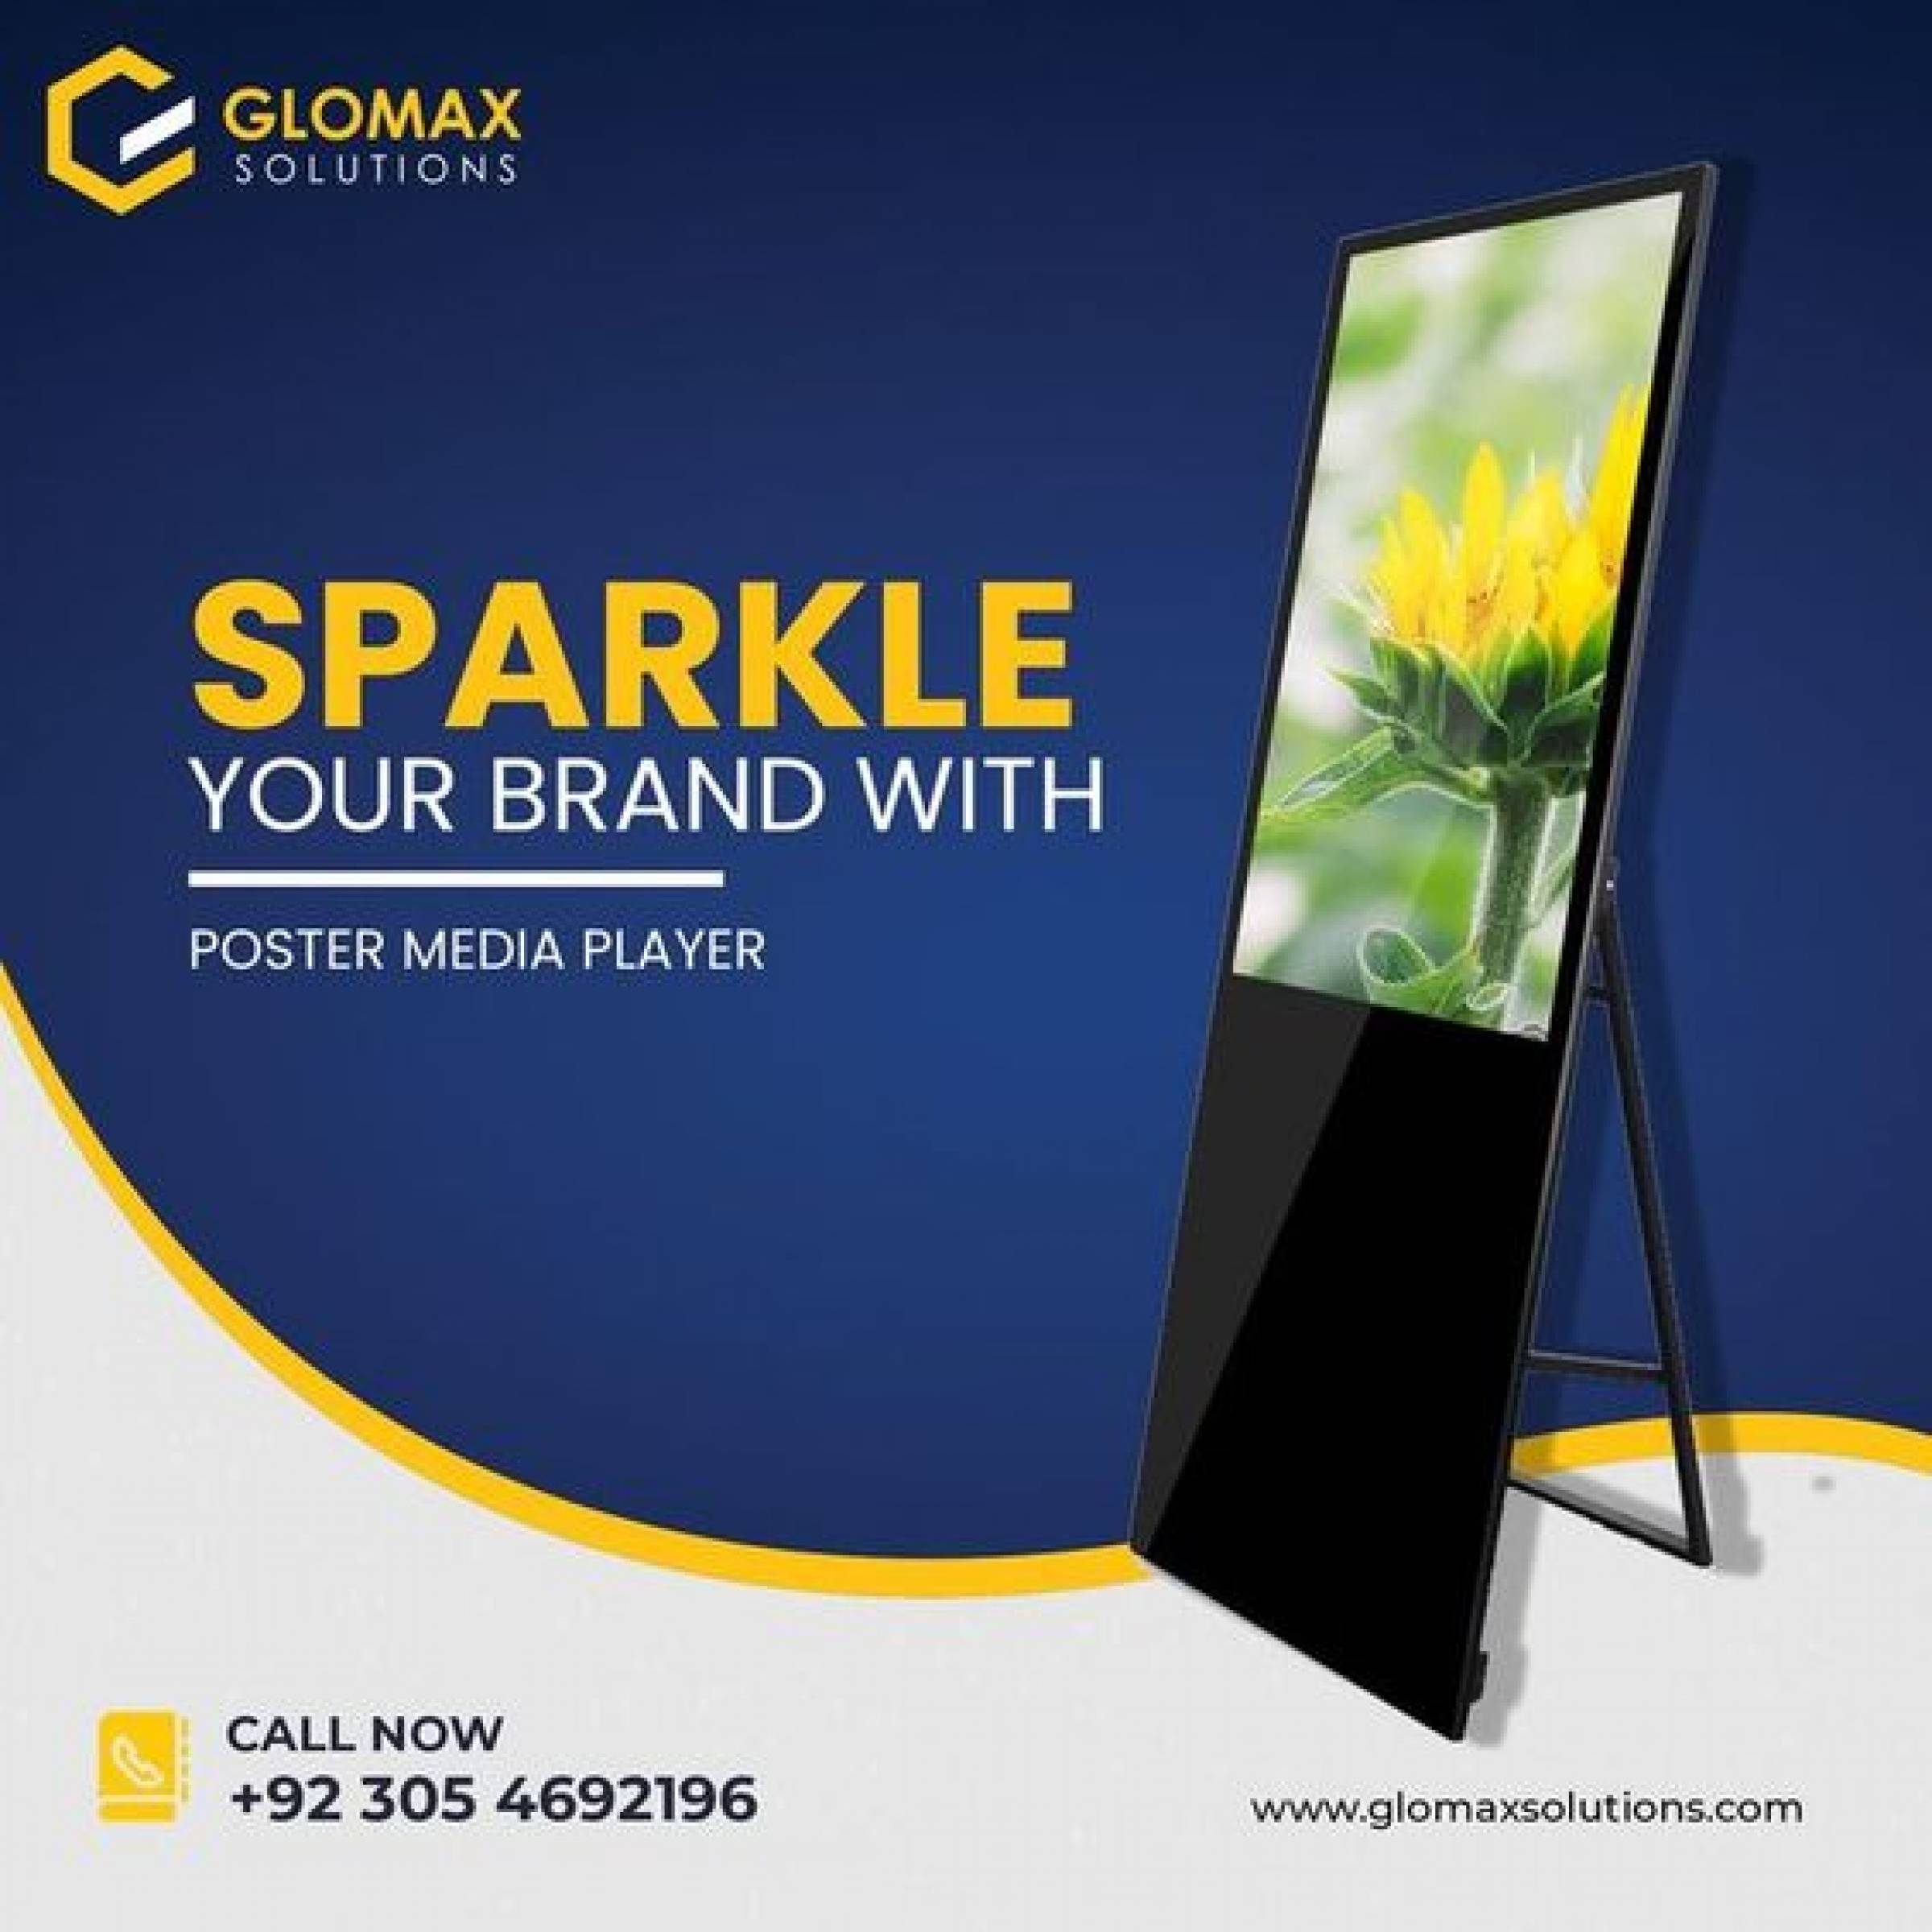 SMD Display - Glomax Solutions